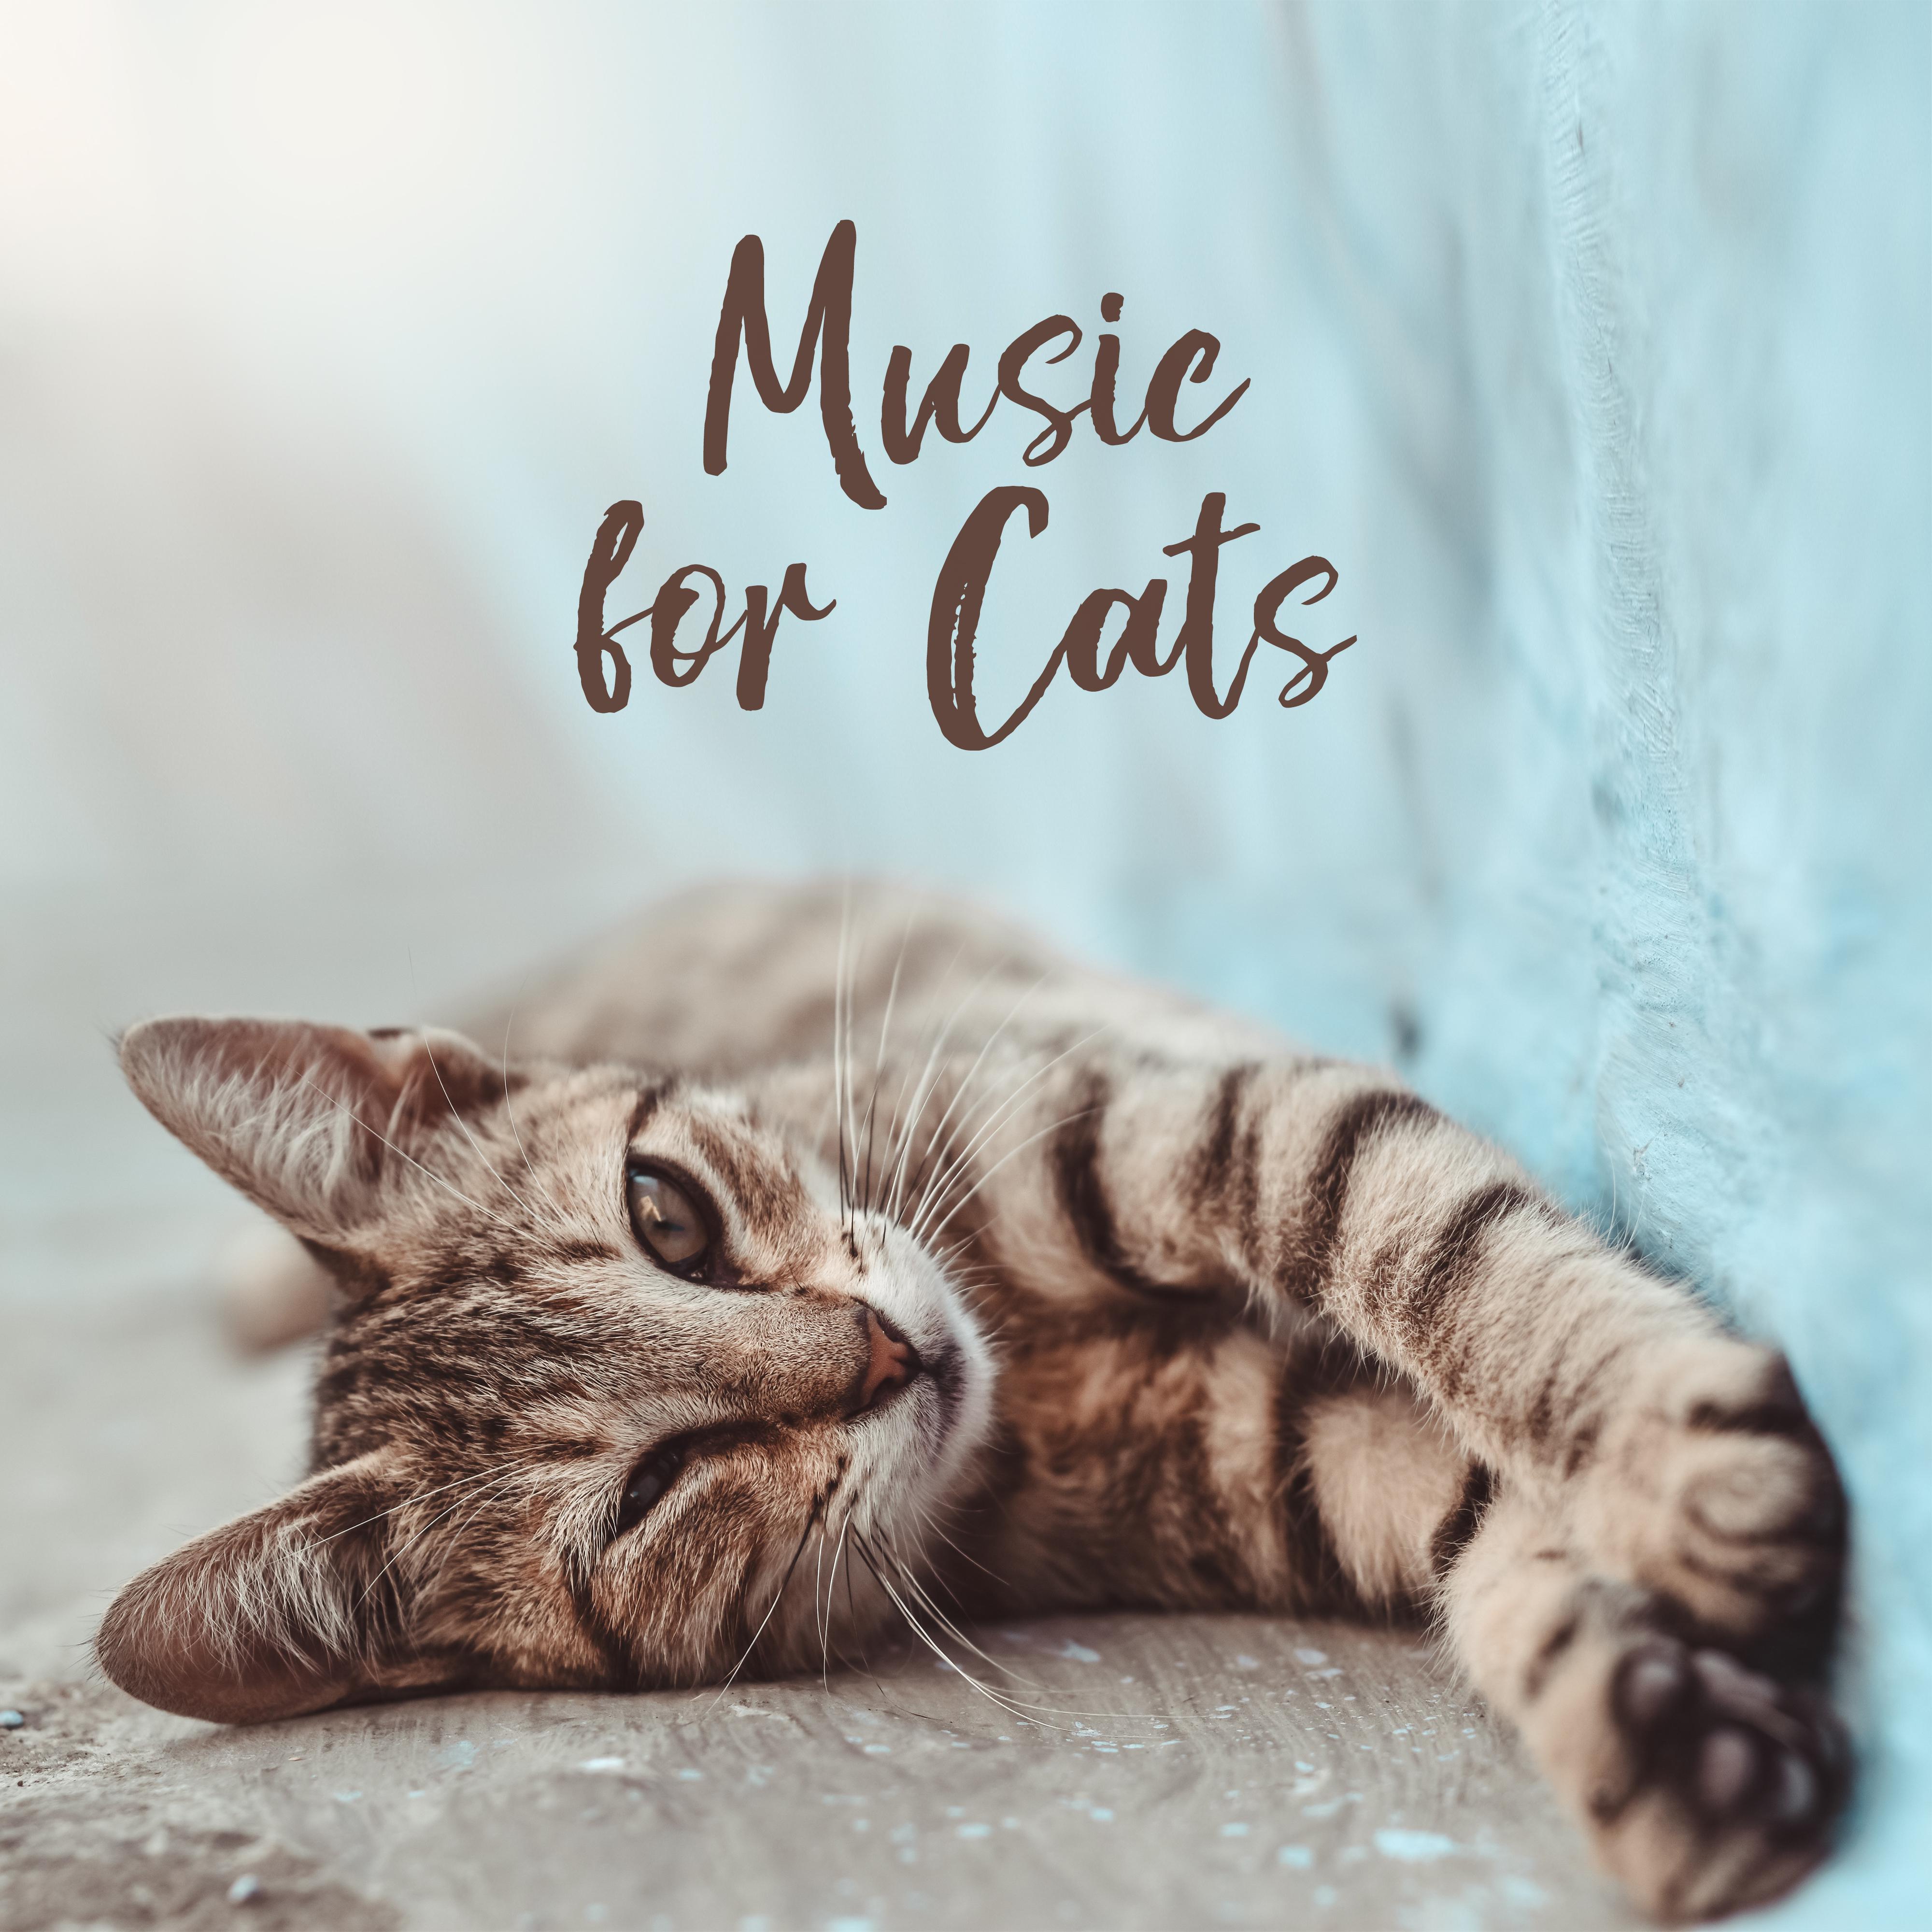 Music for Cats - Cat-friendly Melodies, Created to Relax, De-stress, Sleep and Rest for Your Kitty